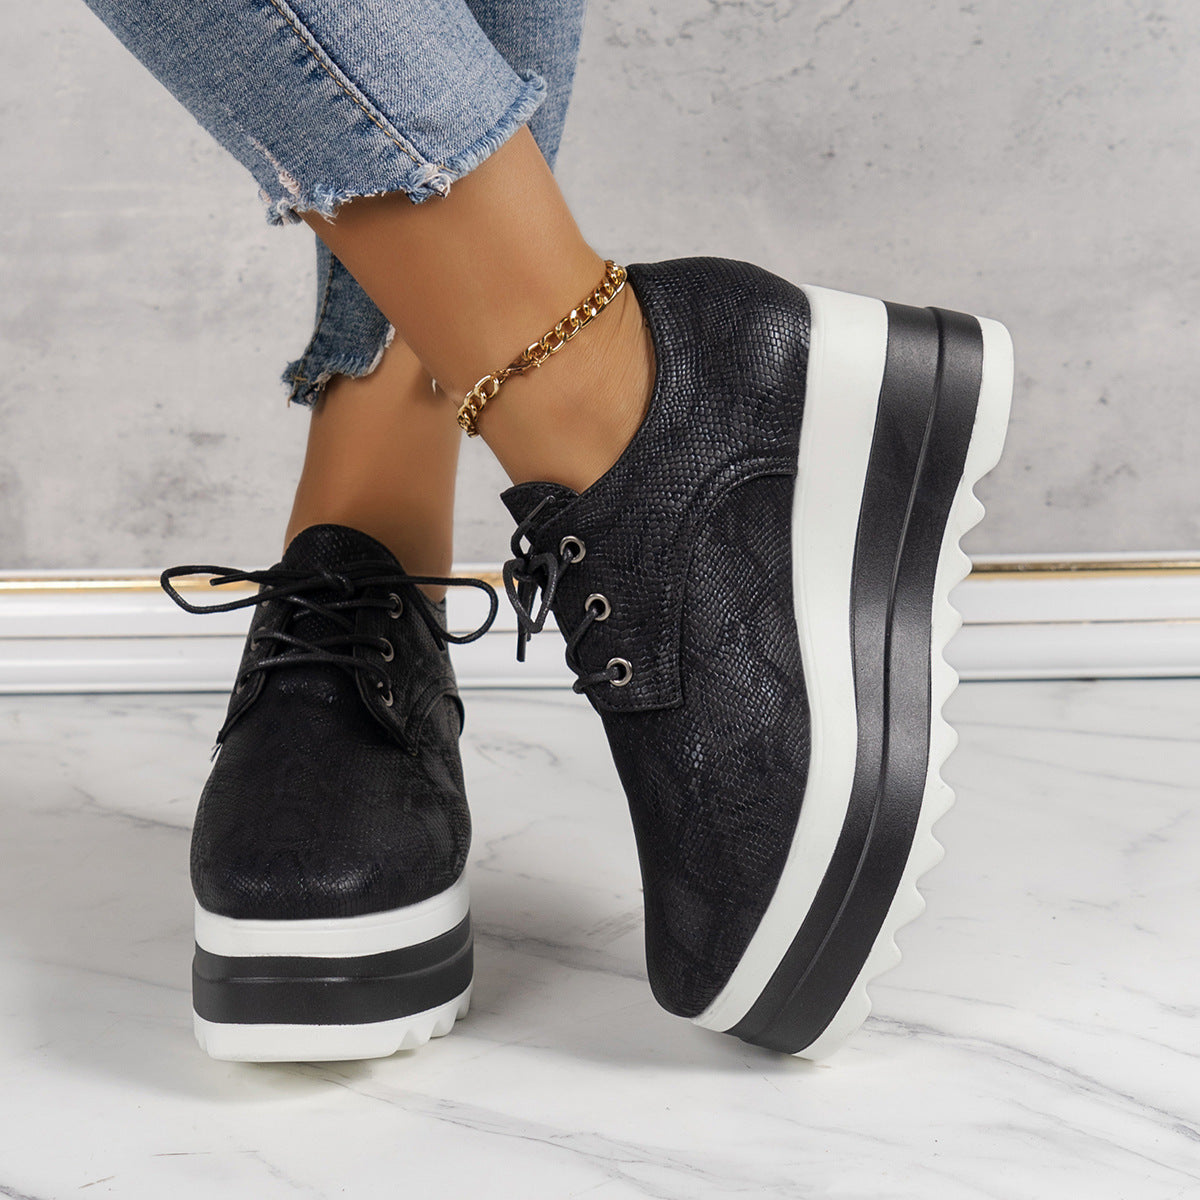 Round Toe Lace-up Platform Thick Bottom Shoes Women